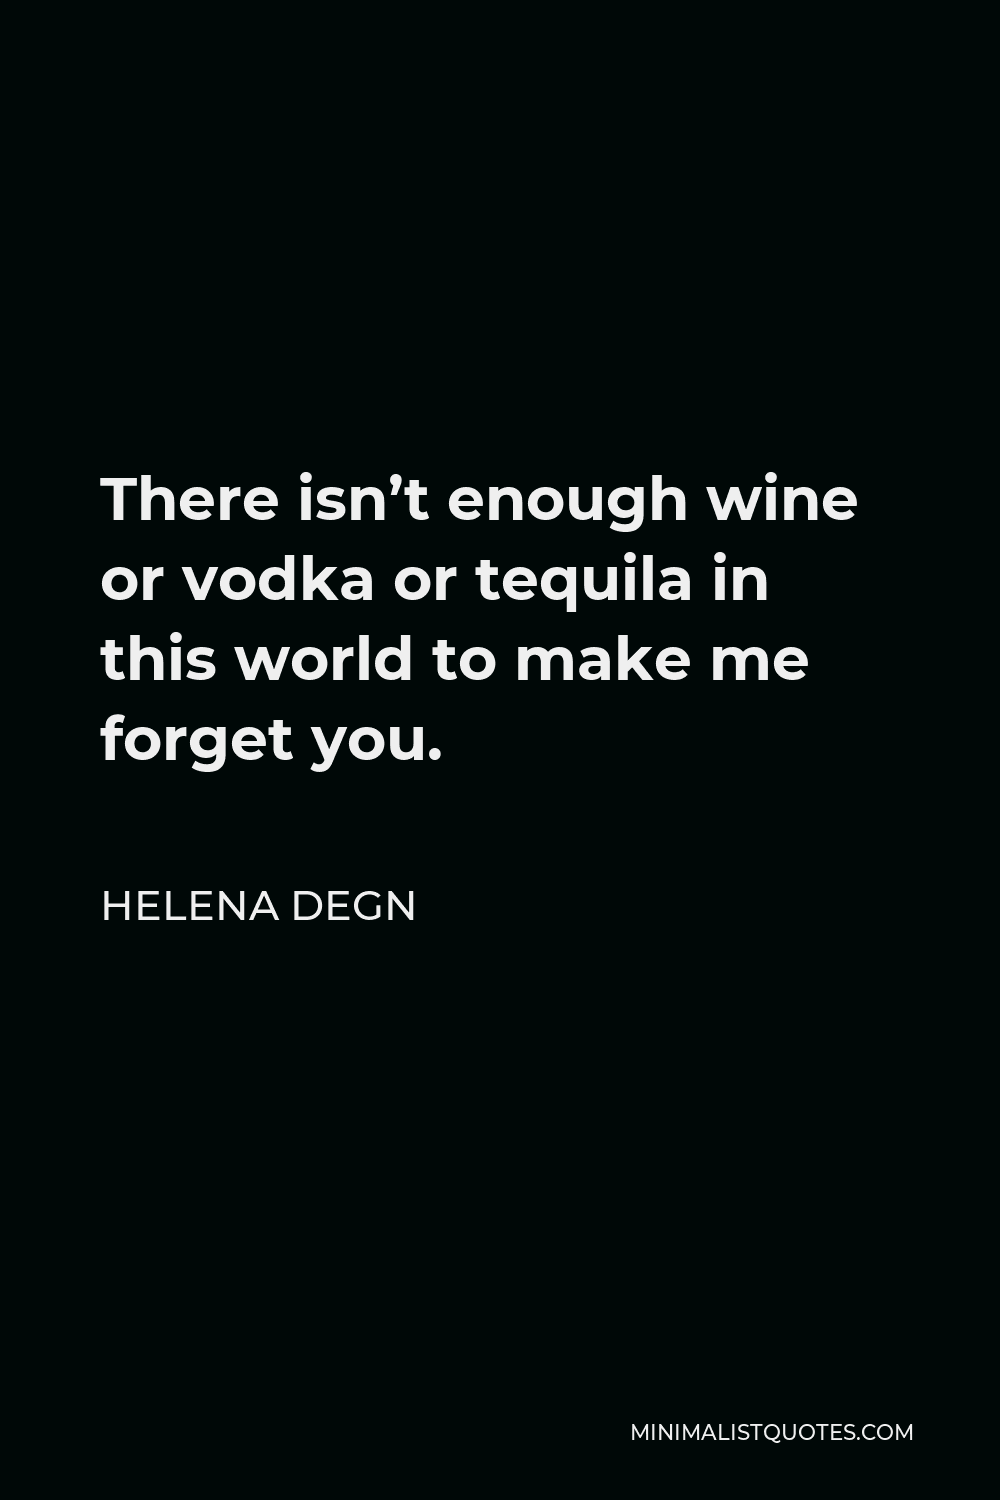 Helena Degn Quote - There isn’t enough wine or vodka or tequila in this world to make me forget you.